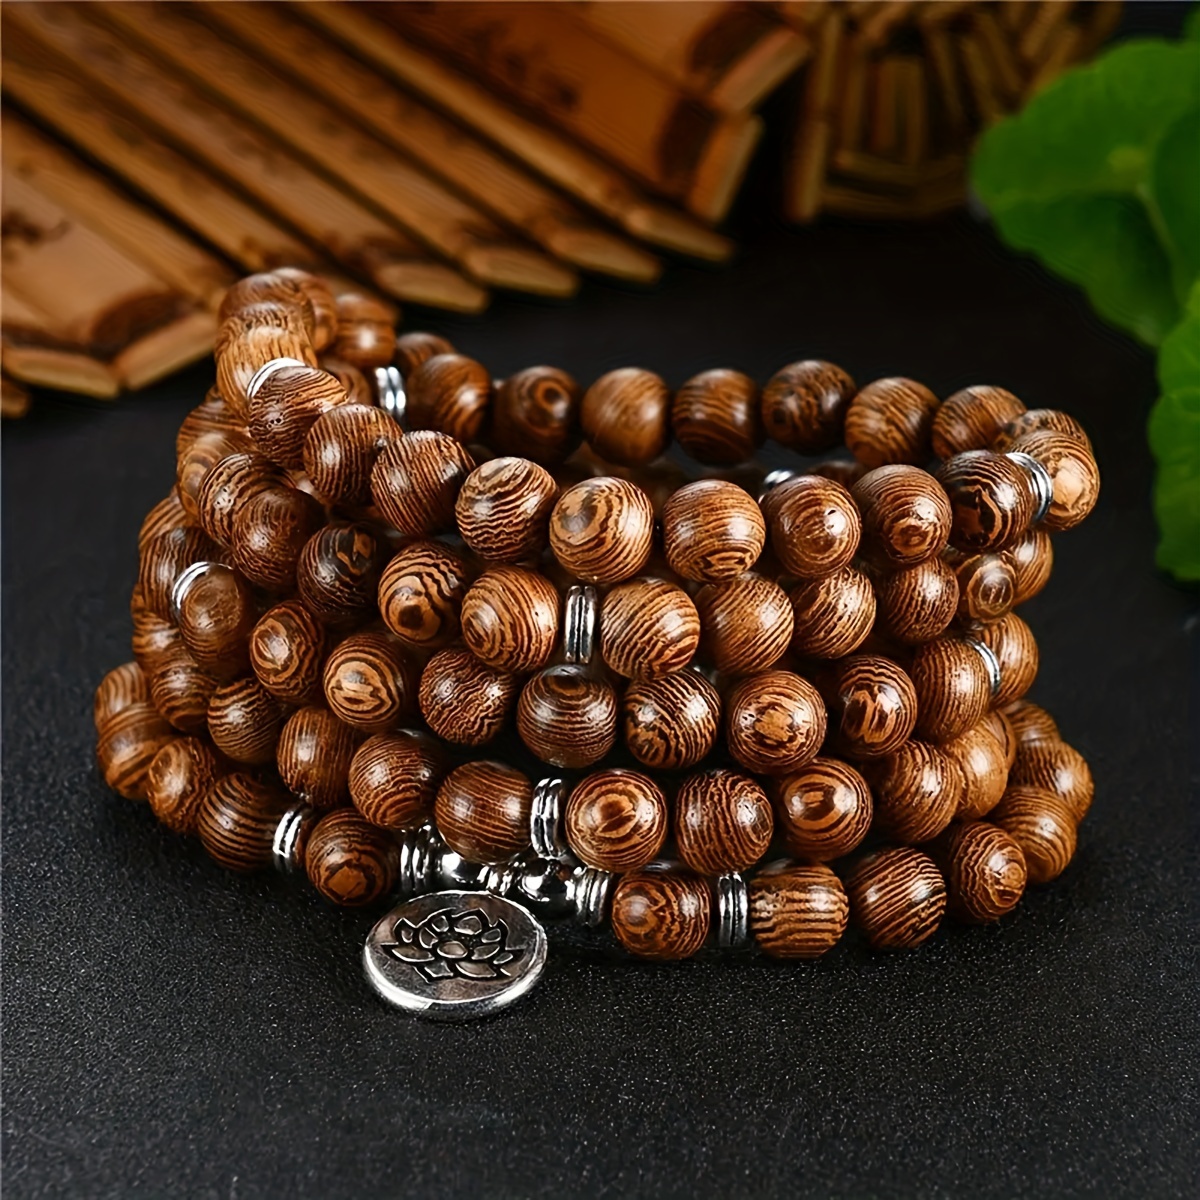 yoga prayer beads, yoga prayer beads Suppliers and Manufacturers at